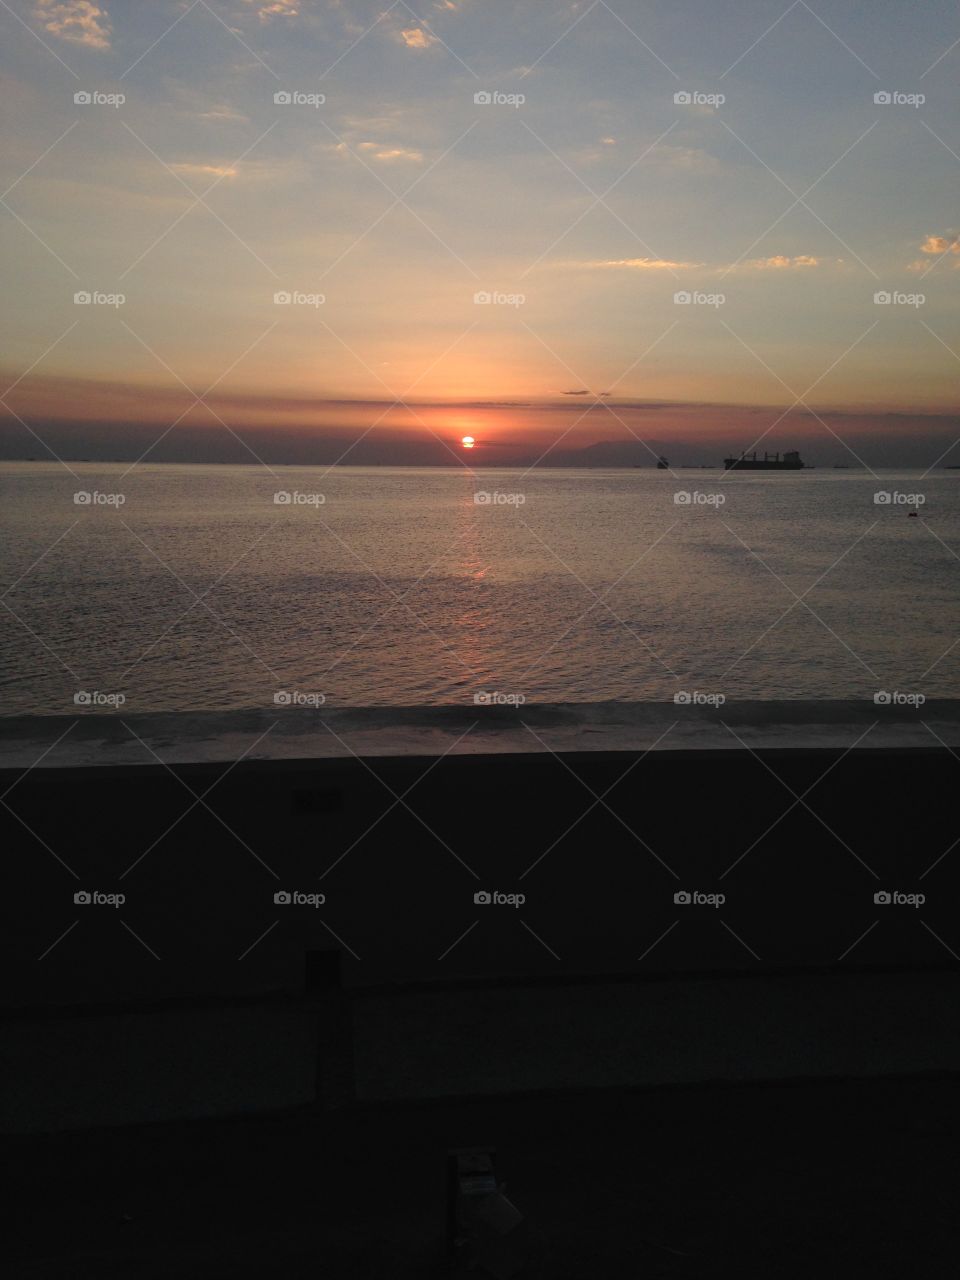 this is another picture of the sunset in manila bay